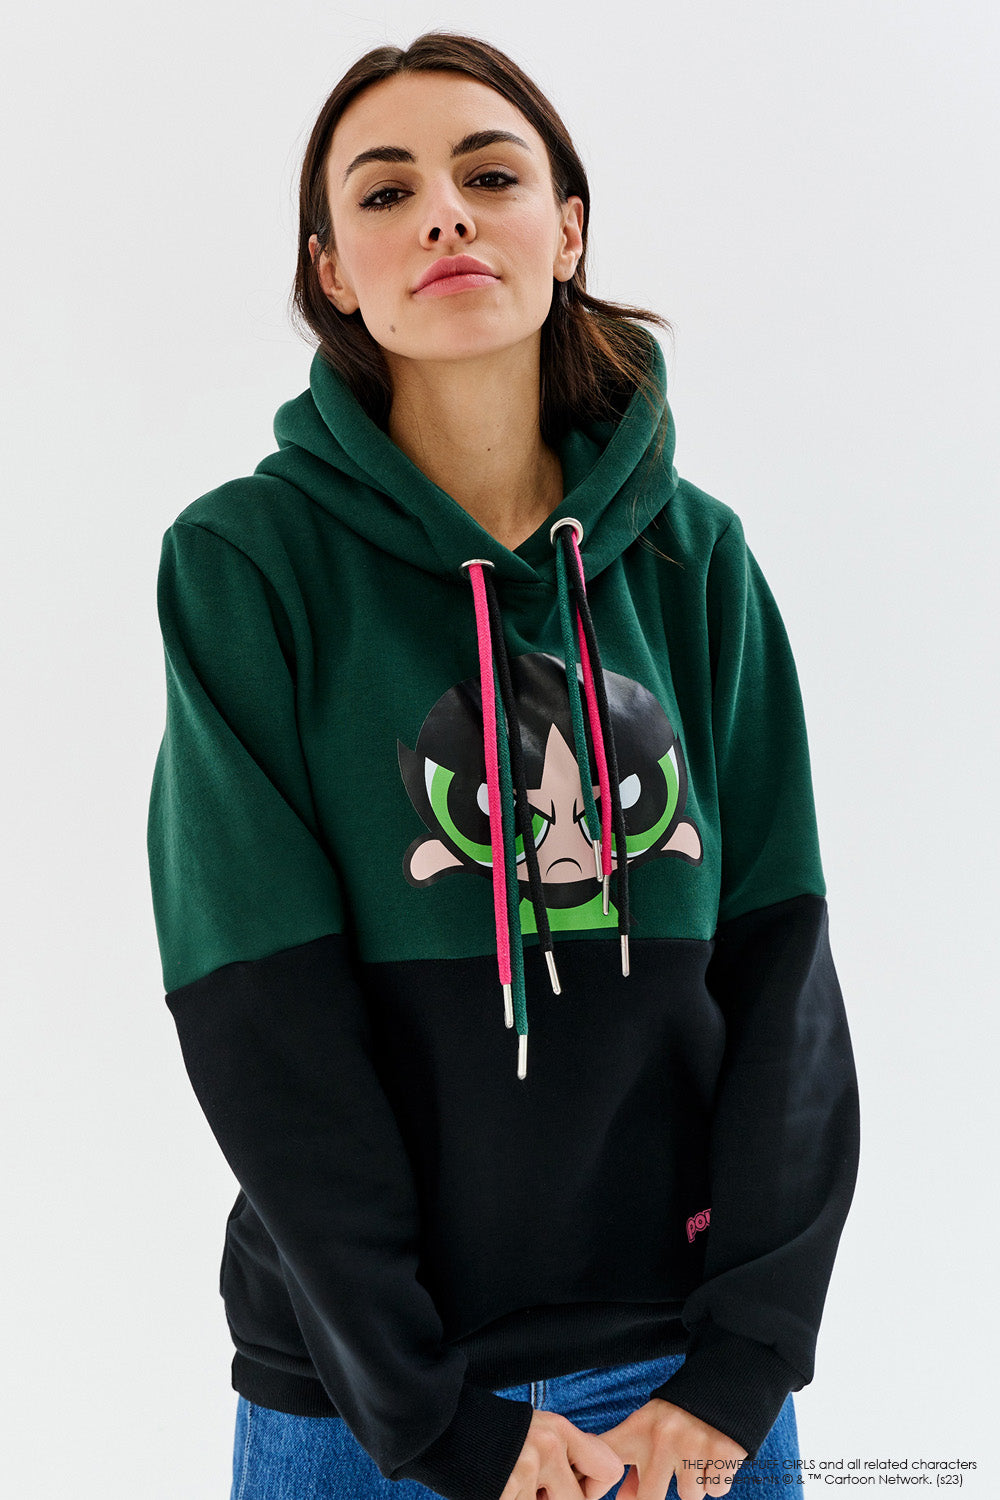 The Buttercup Power hoodie